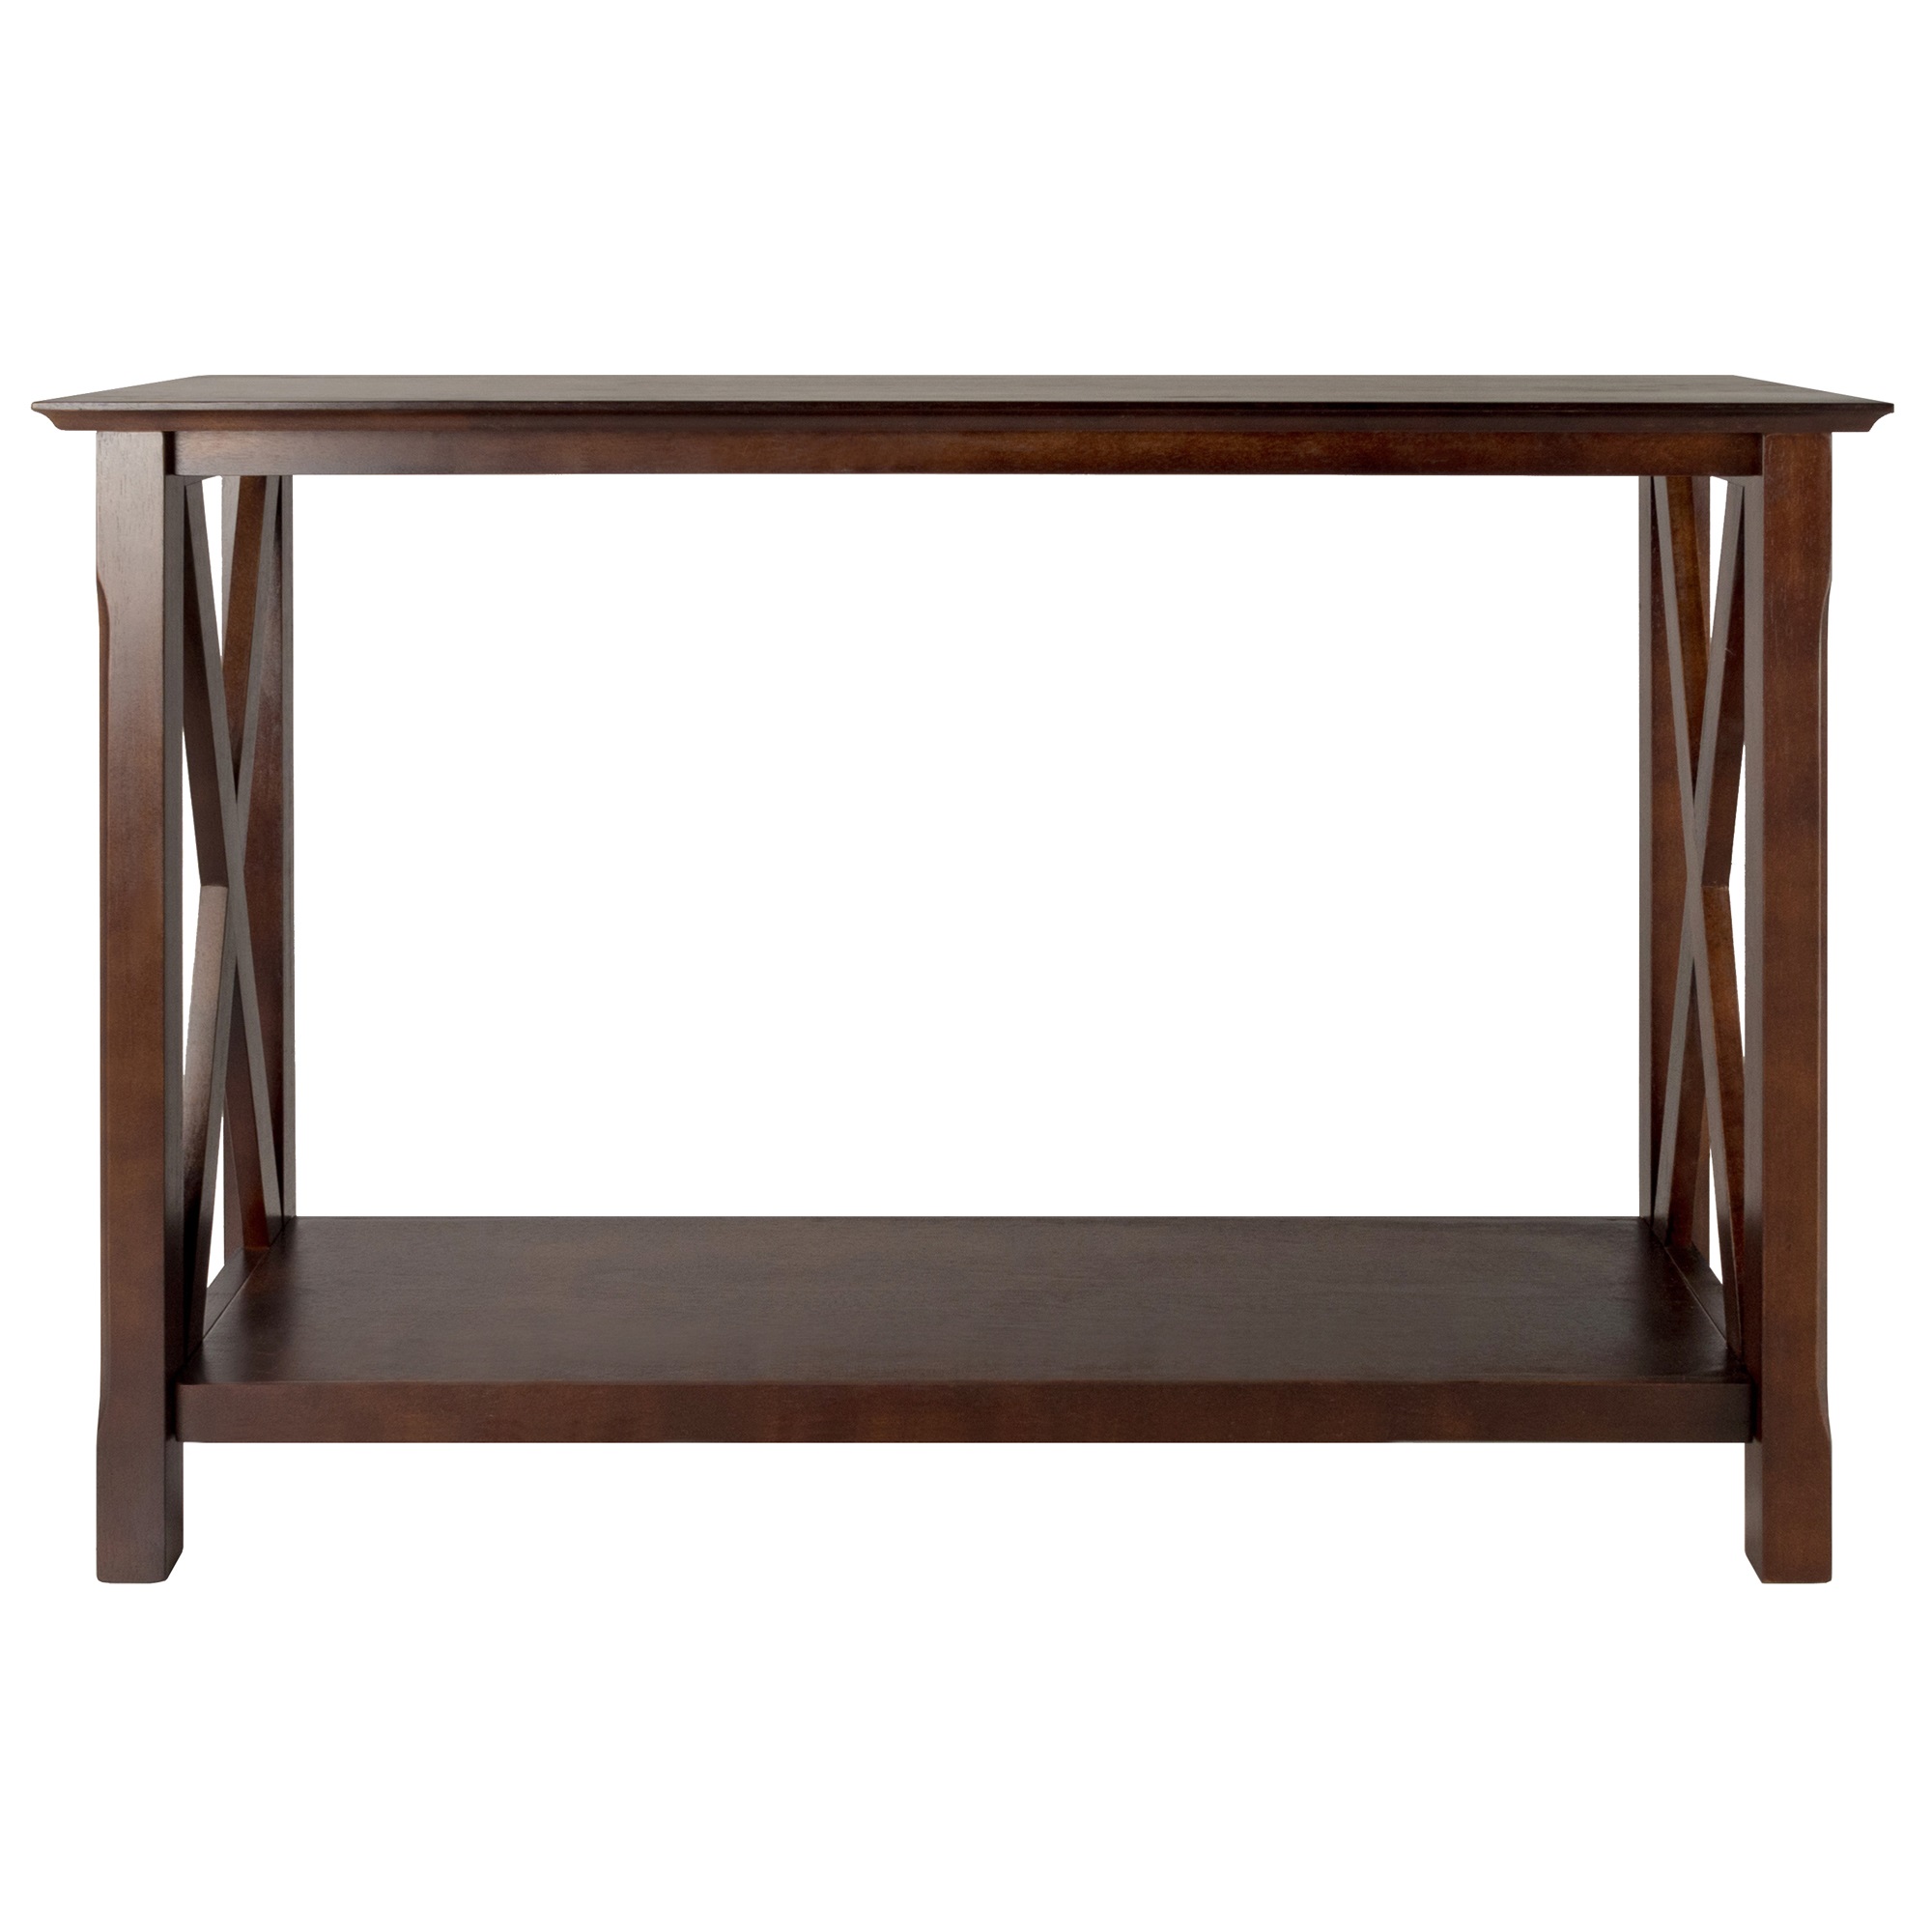 Winsome Wood Xola X-Panel Console Table, Cappuccino Finish - image 5 of 5